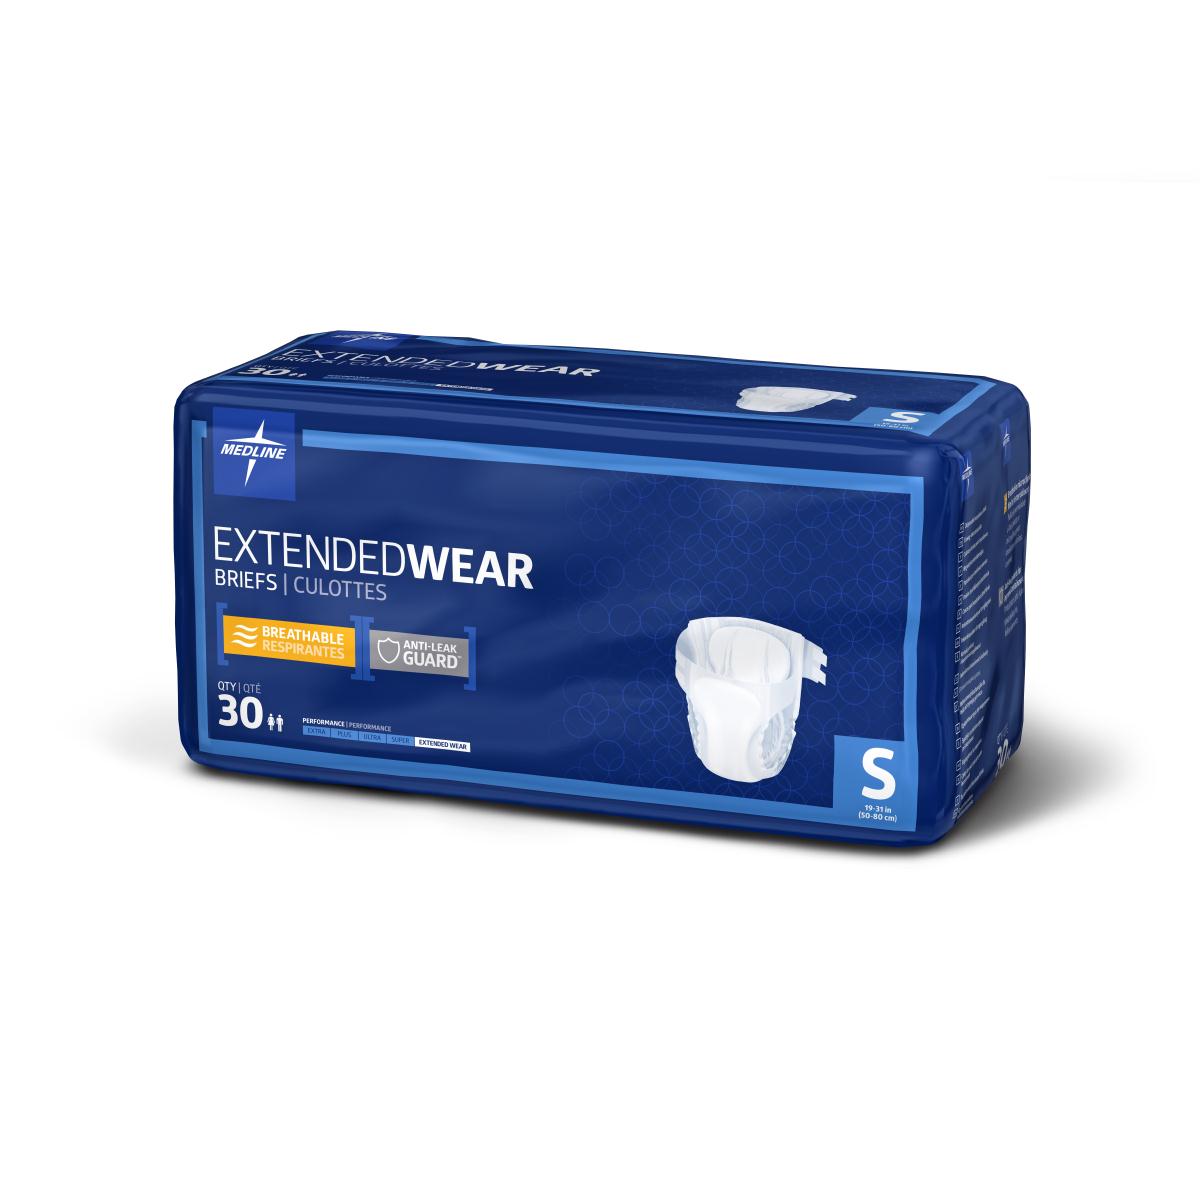 Extended Wear High-Capacity Adult Incontinence Briefs by Medline